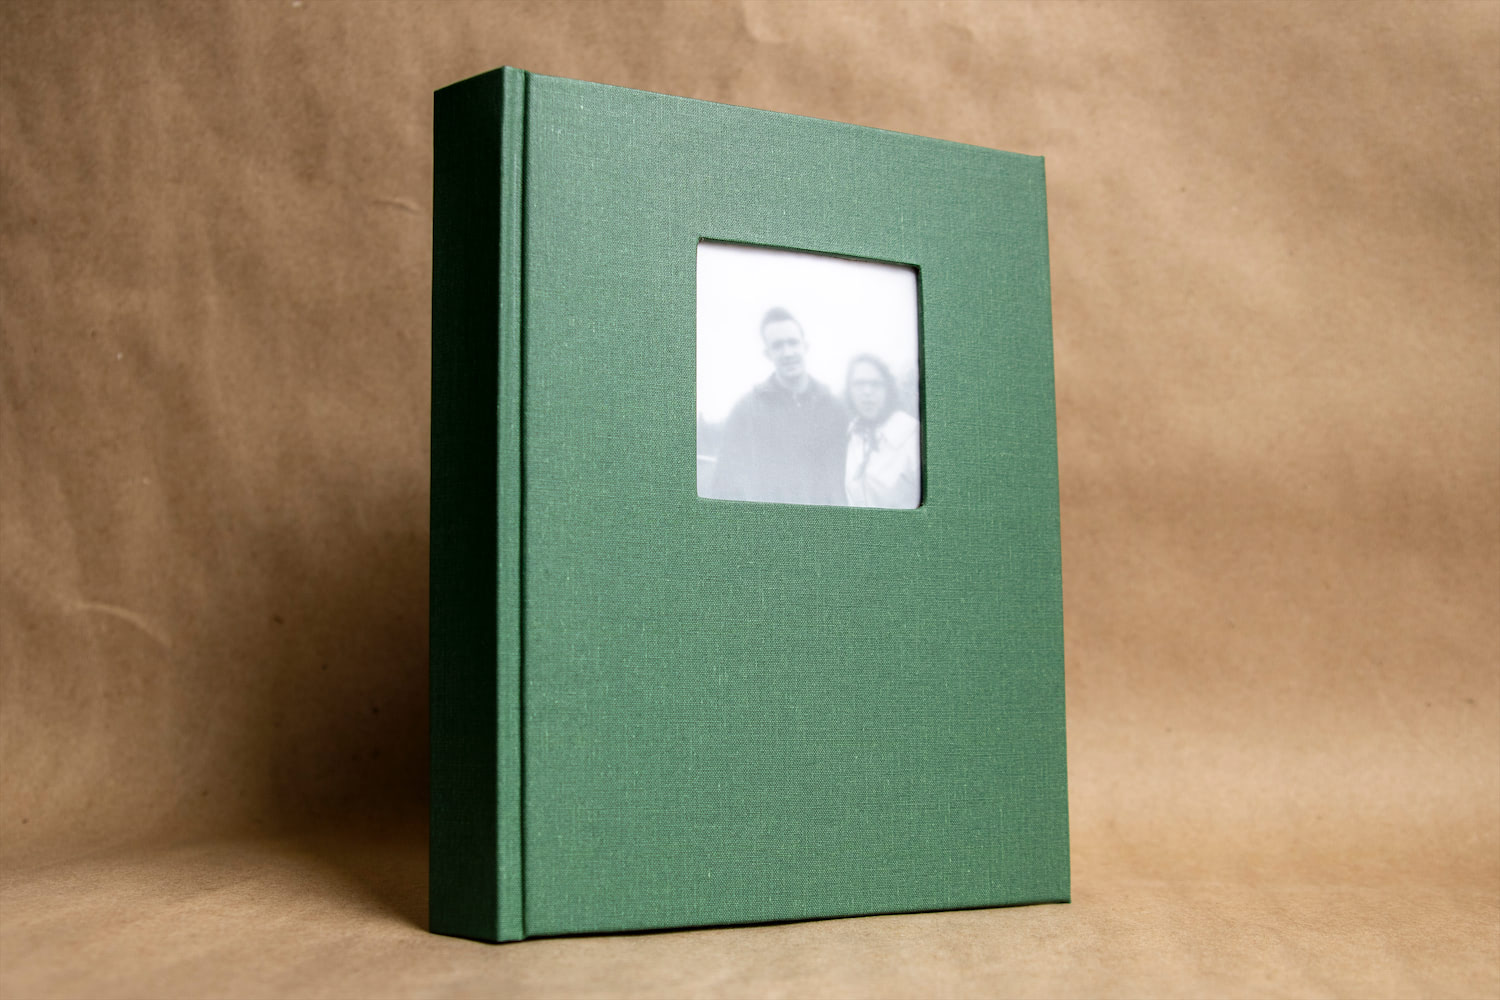 The front cover of a drum leaf style book with green bookcloth and an image of two people.